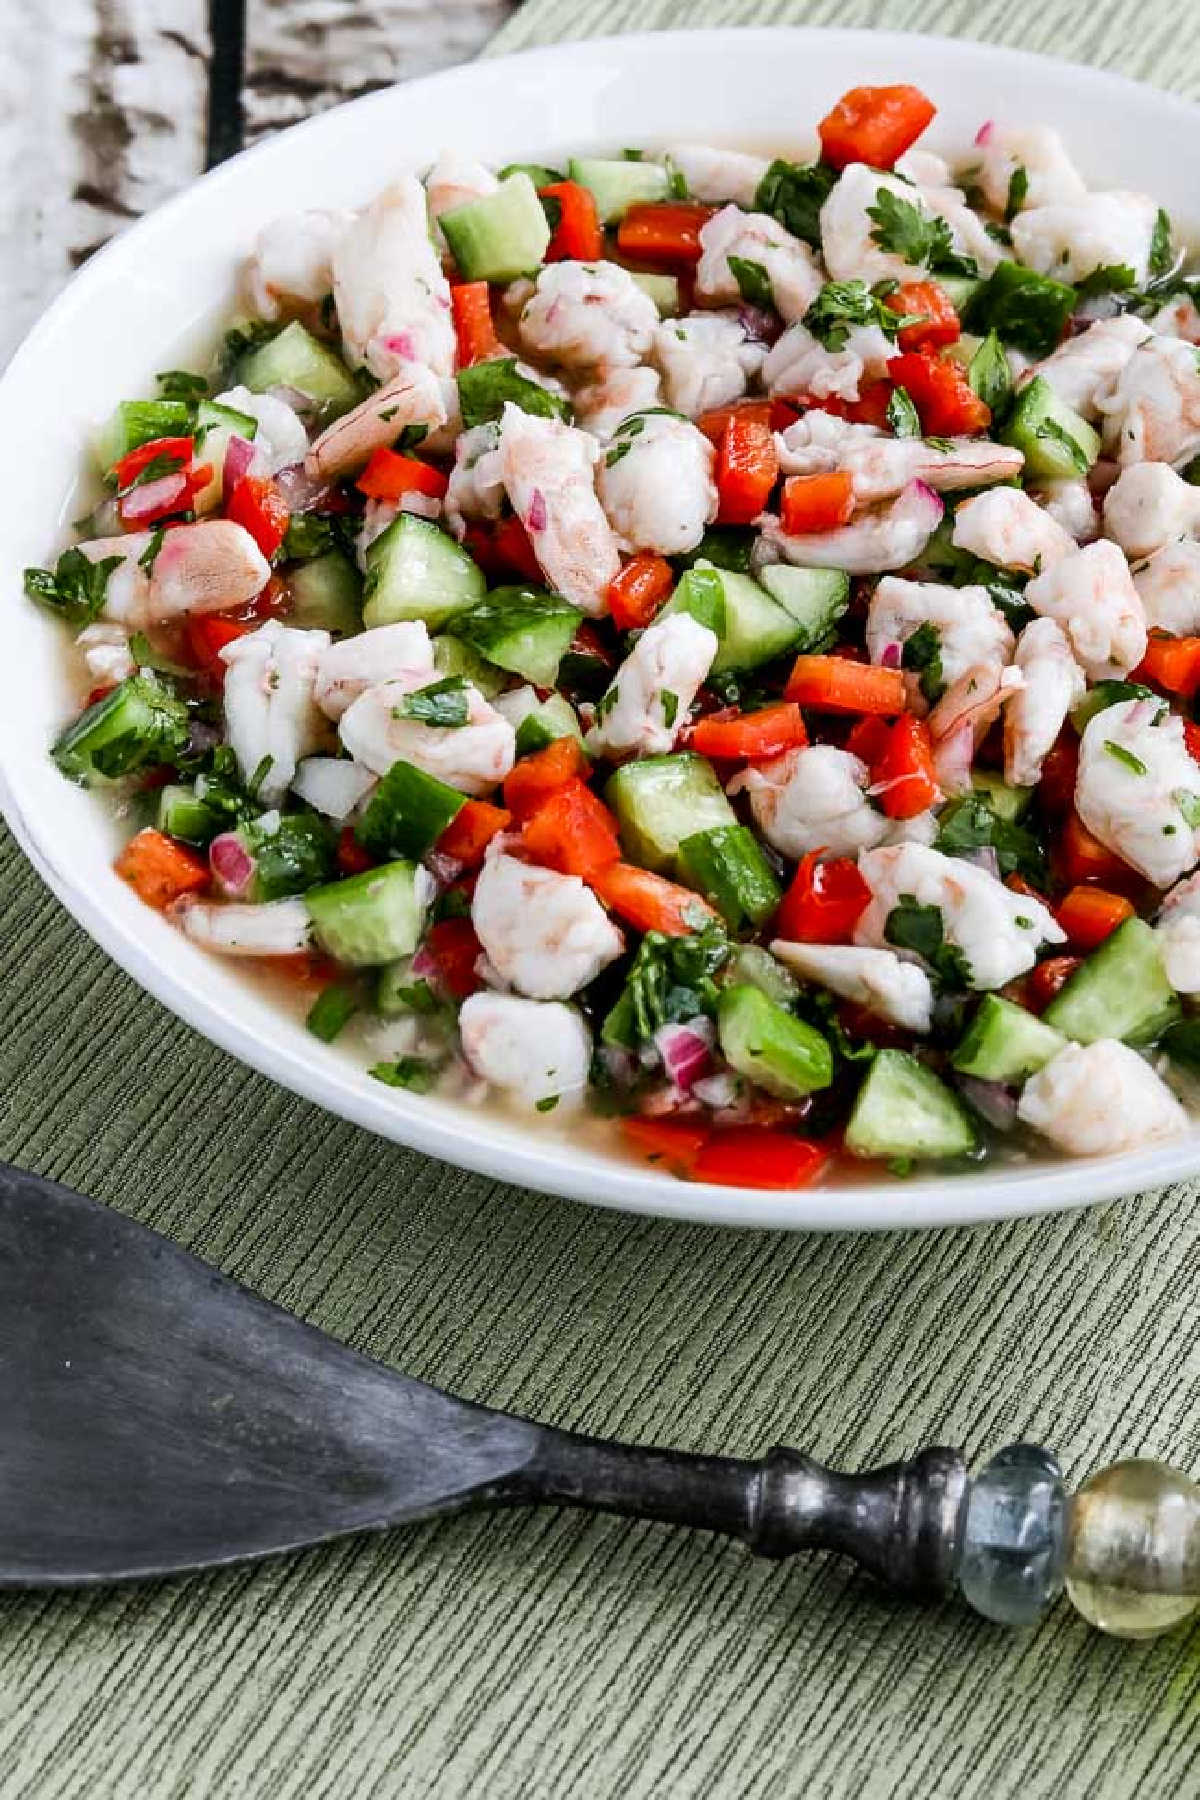 Easy Shrimp Ceviche Recipe shown in serving dish with serving fork